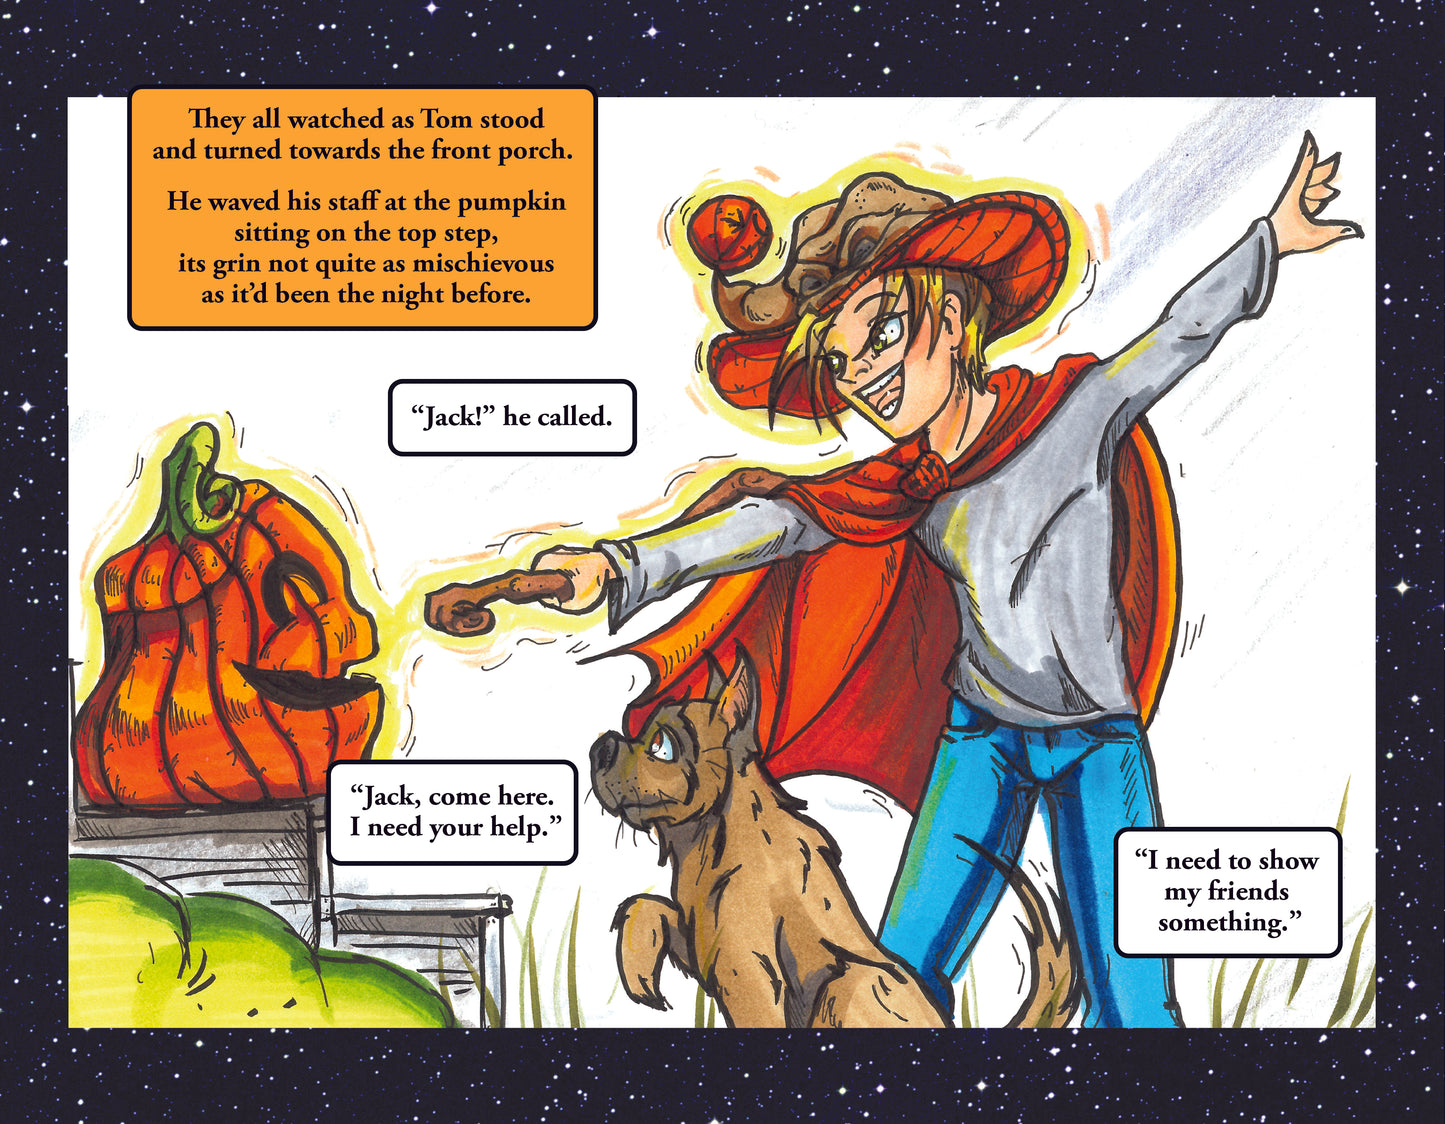 The Pumpkin Wizard: Goes to the Pumpkin Planet